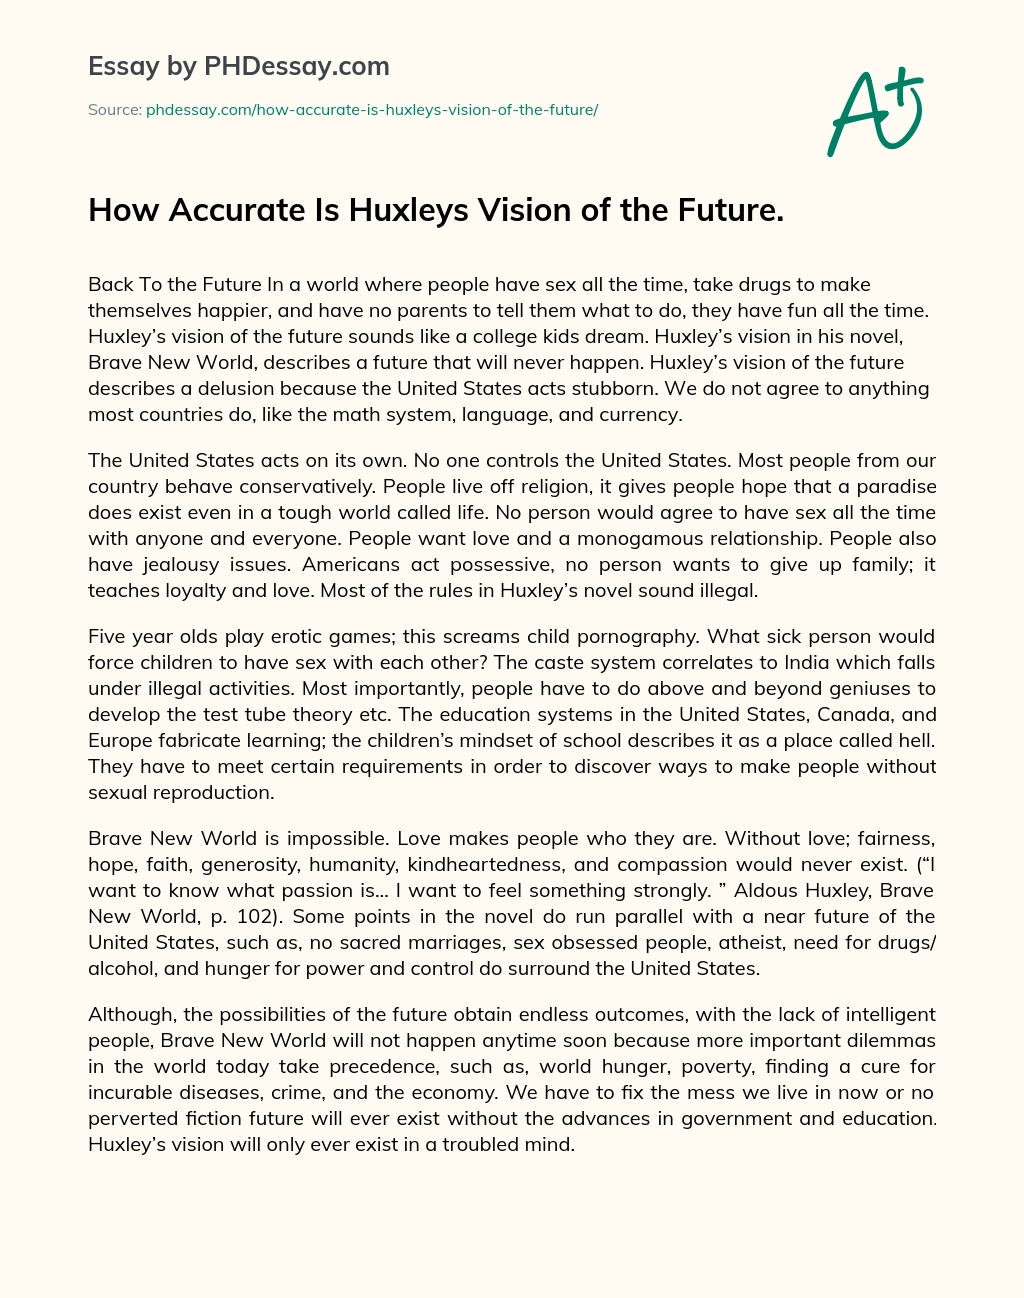 How Accurate Is Huxleys Vision of the Future. essay